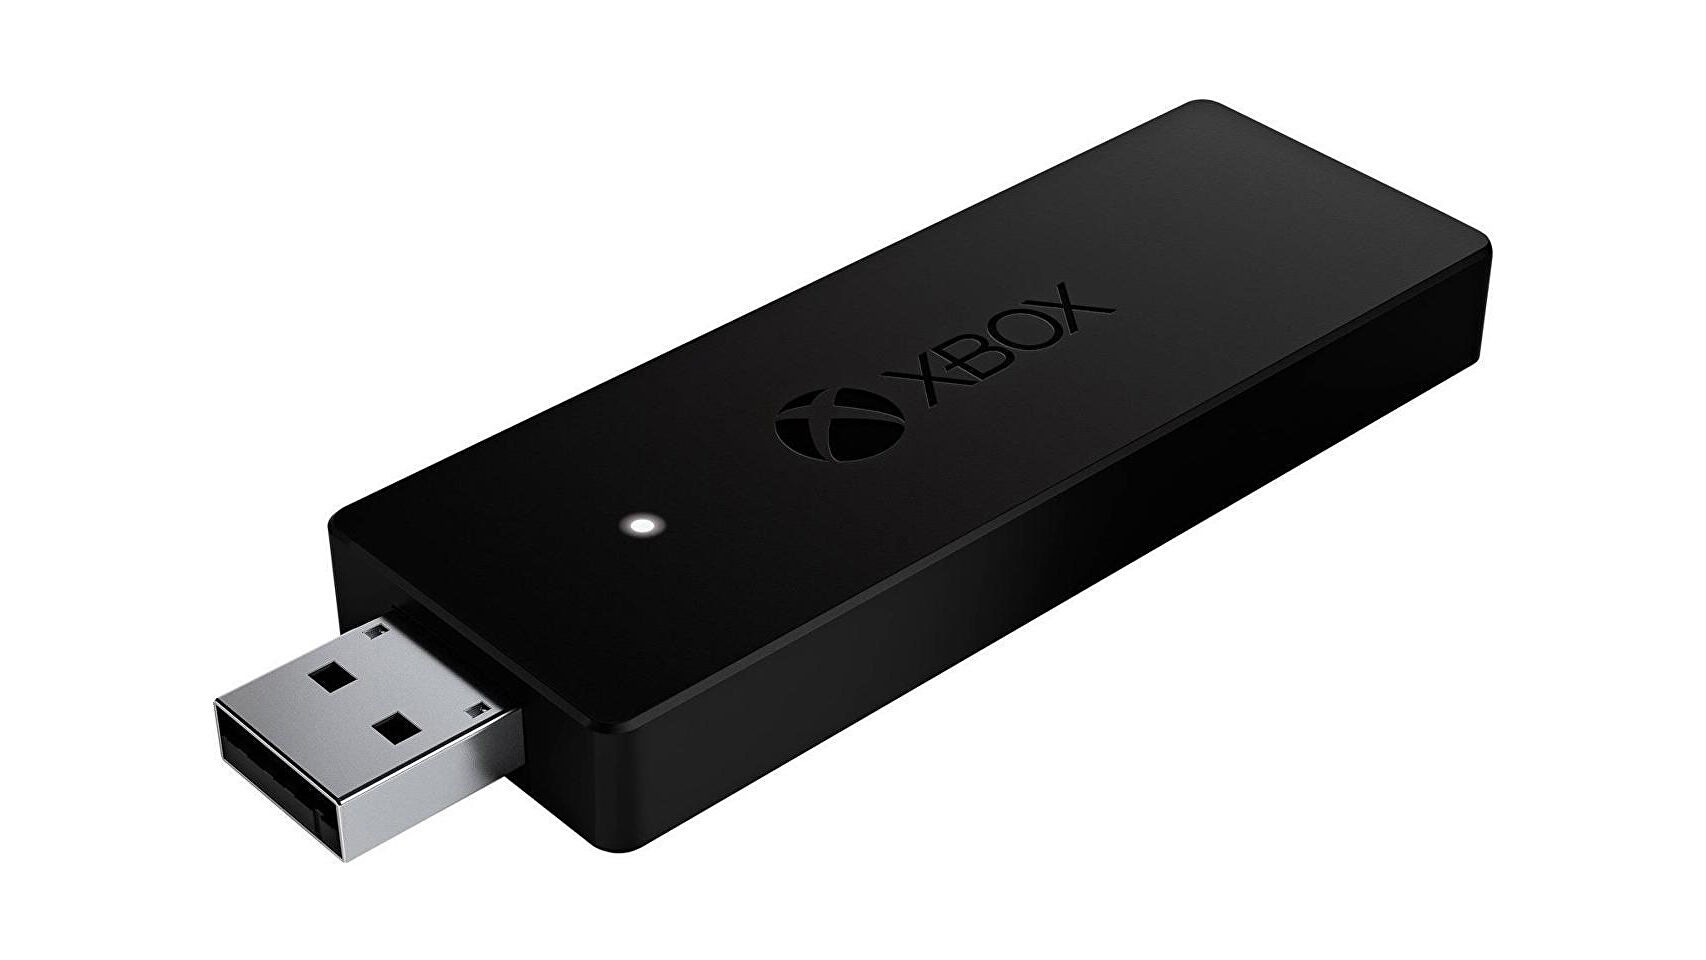 Using an Xbox controller? Pick up this $18 Microsoft adapter for low-latency wireless